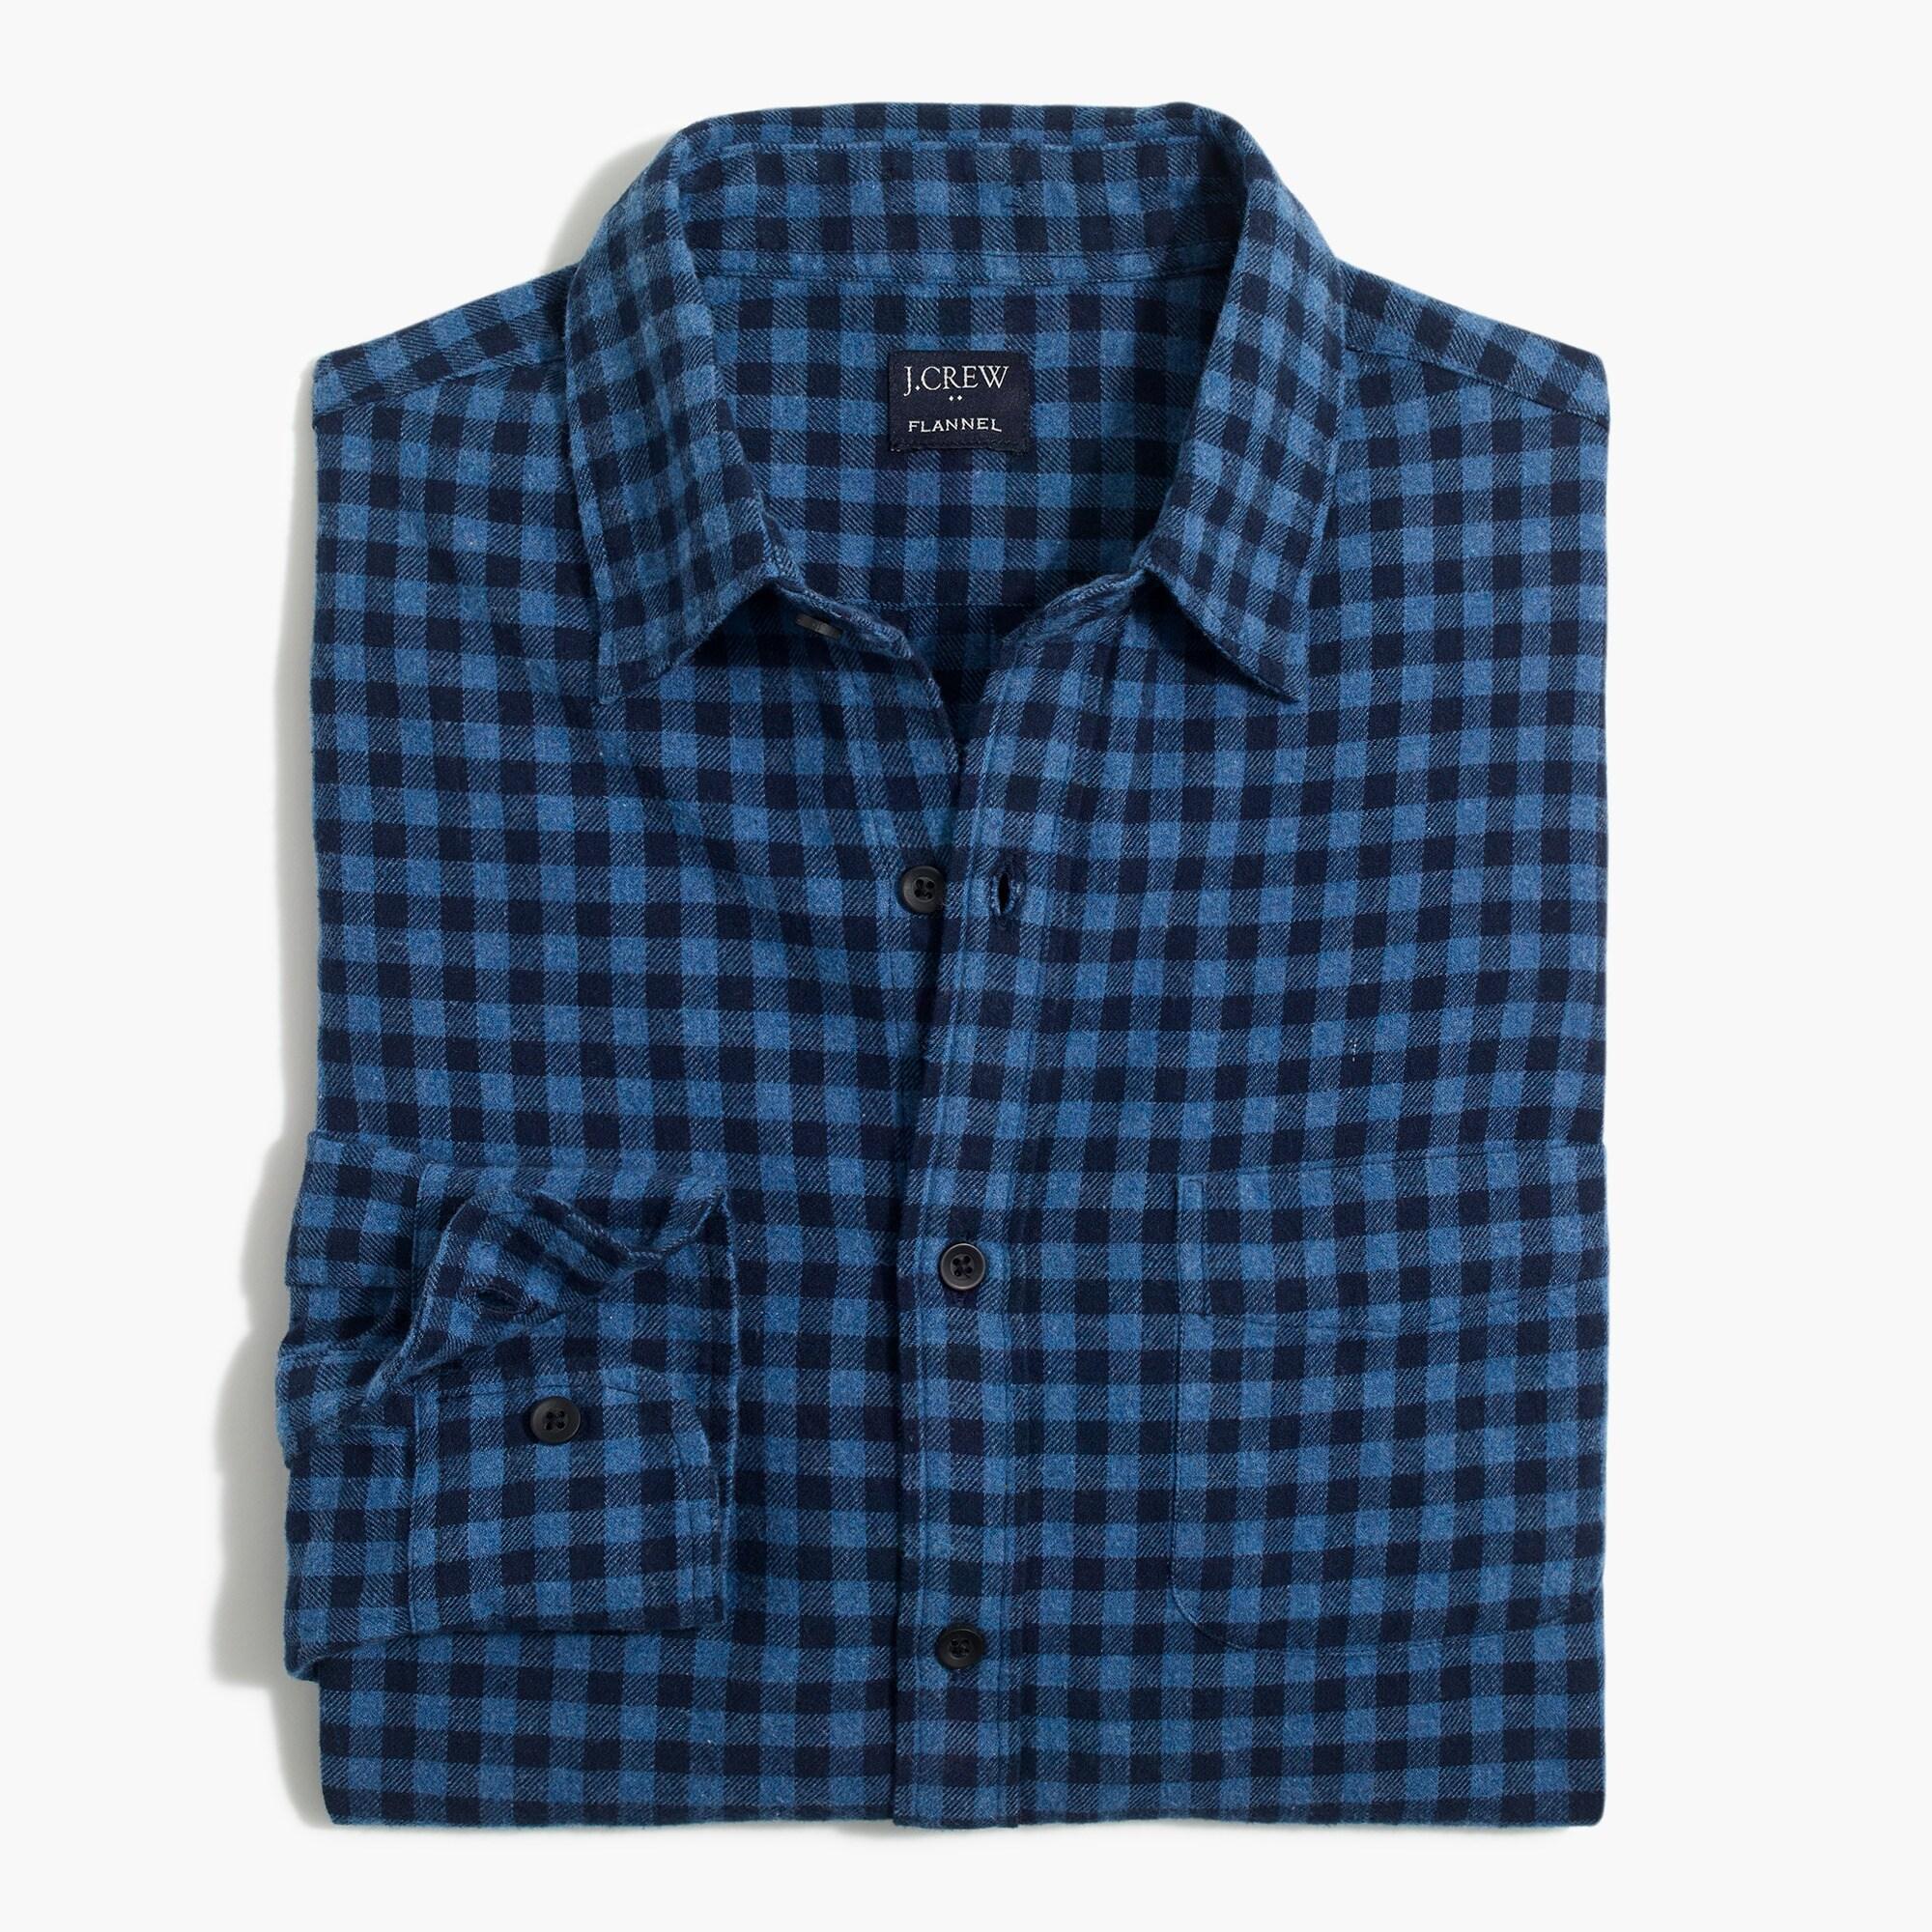 J.Crew Buffalo-check Tall Flannel Shirt in Blue for Men - Lyst